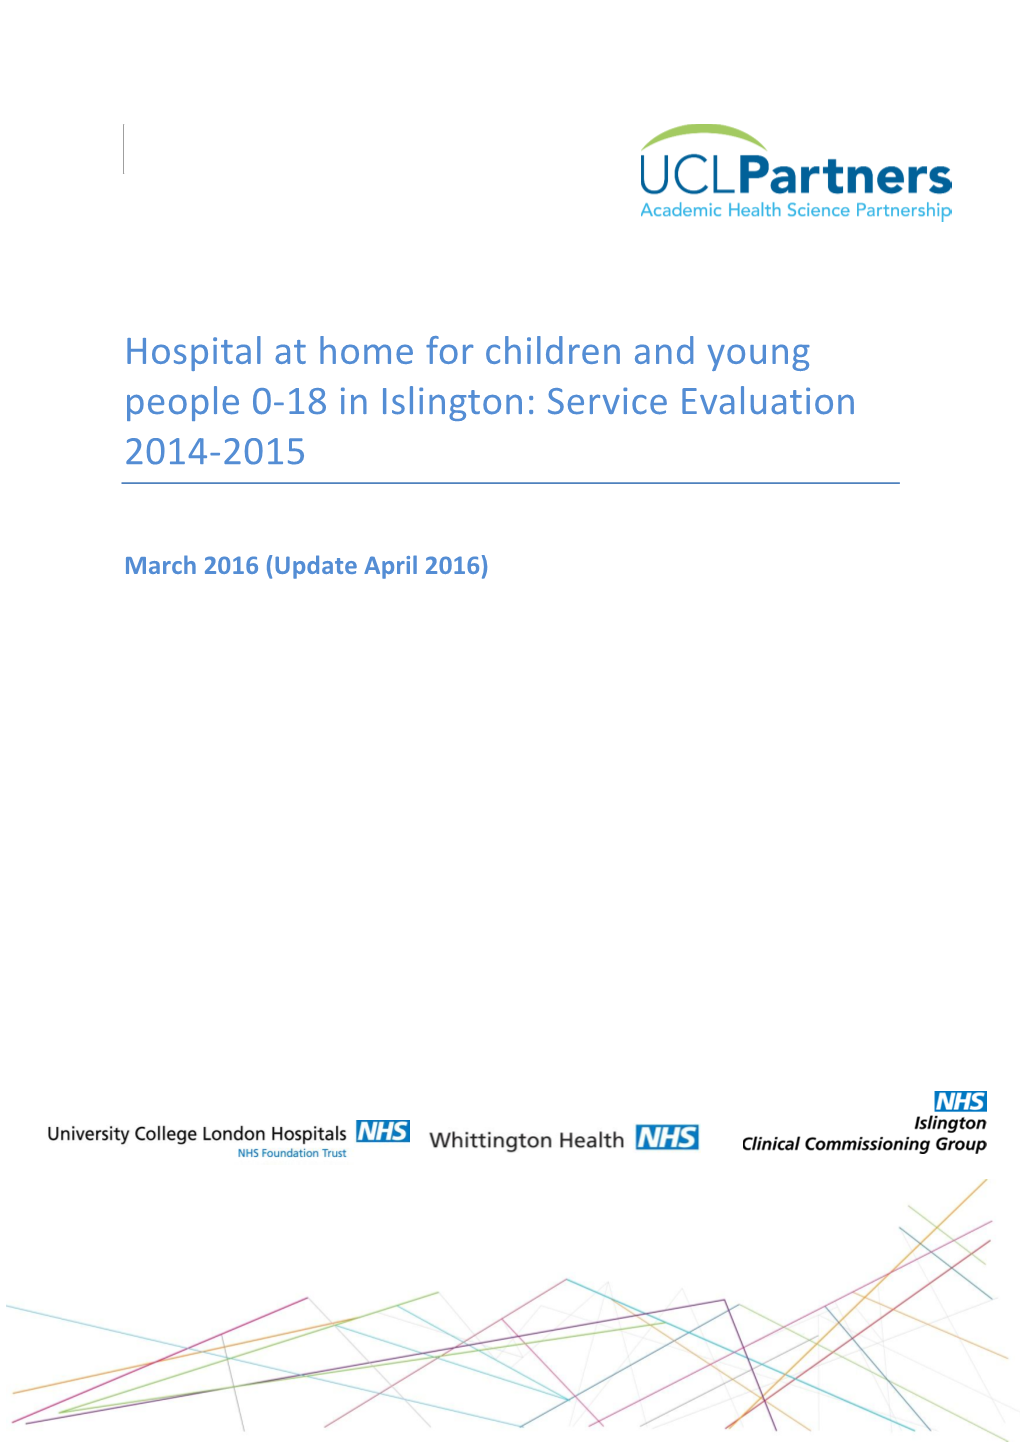 Hospital at Home for Children and Young People 0-18 in Islington: Service Evaluation 2014-2015